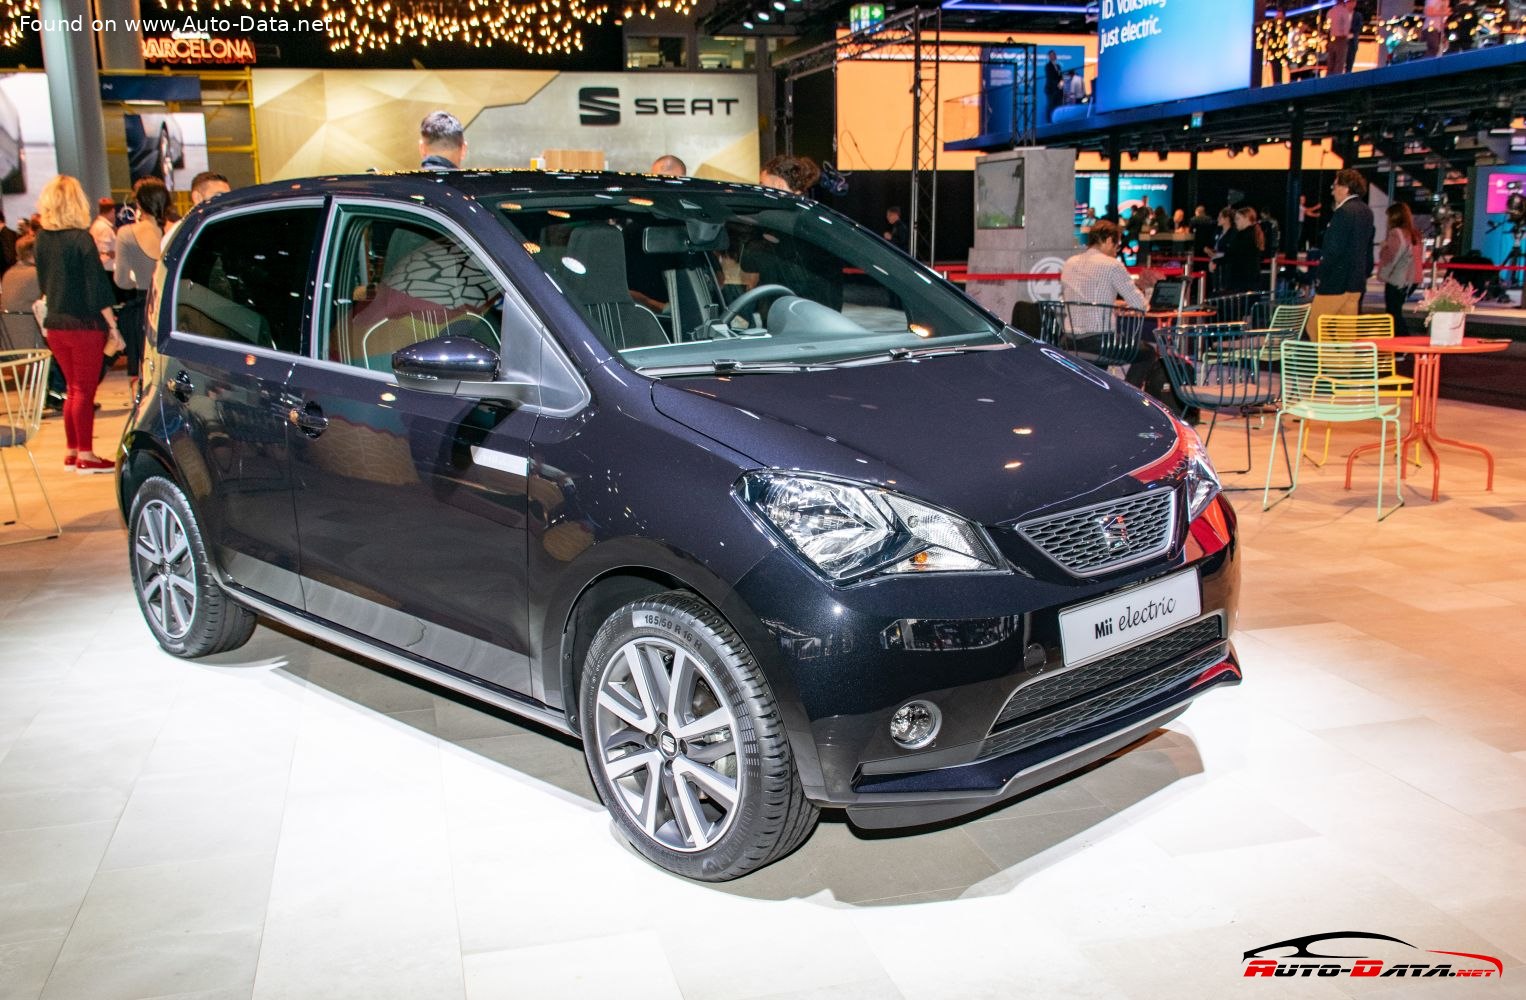 2019 Seat Mii Electric 36.8 kWh (83 Hp)  Technical specs, data, fuel  consumption, Dimensions